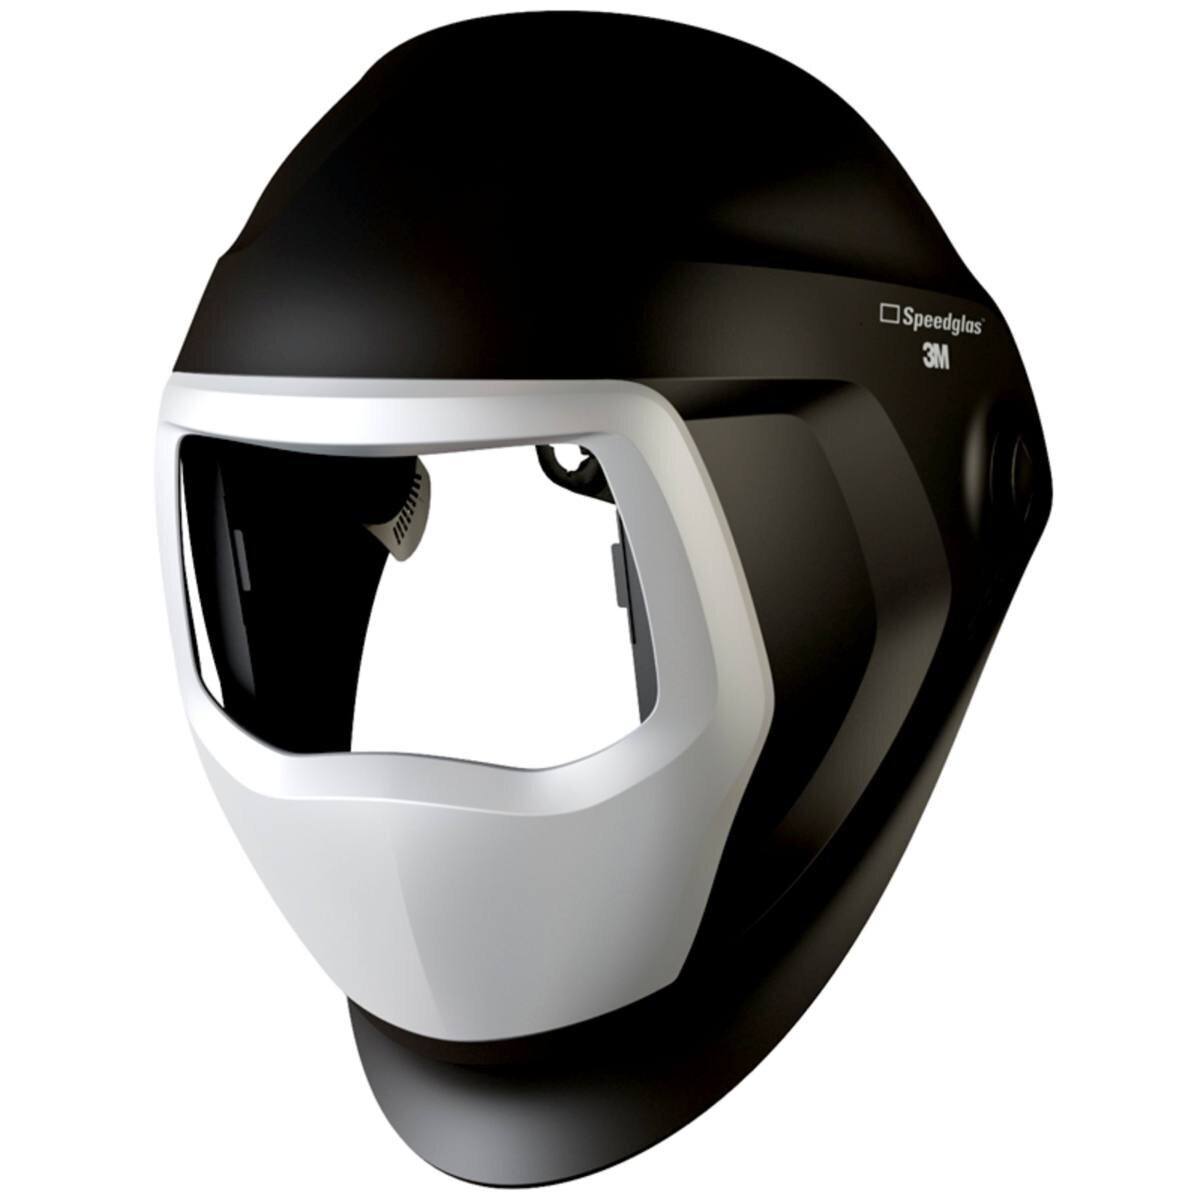 3M Speedglas Welding mask 9100 without side window, with headband, without ADF automatic welding filter #501100